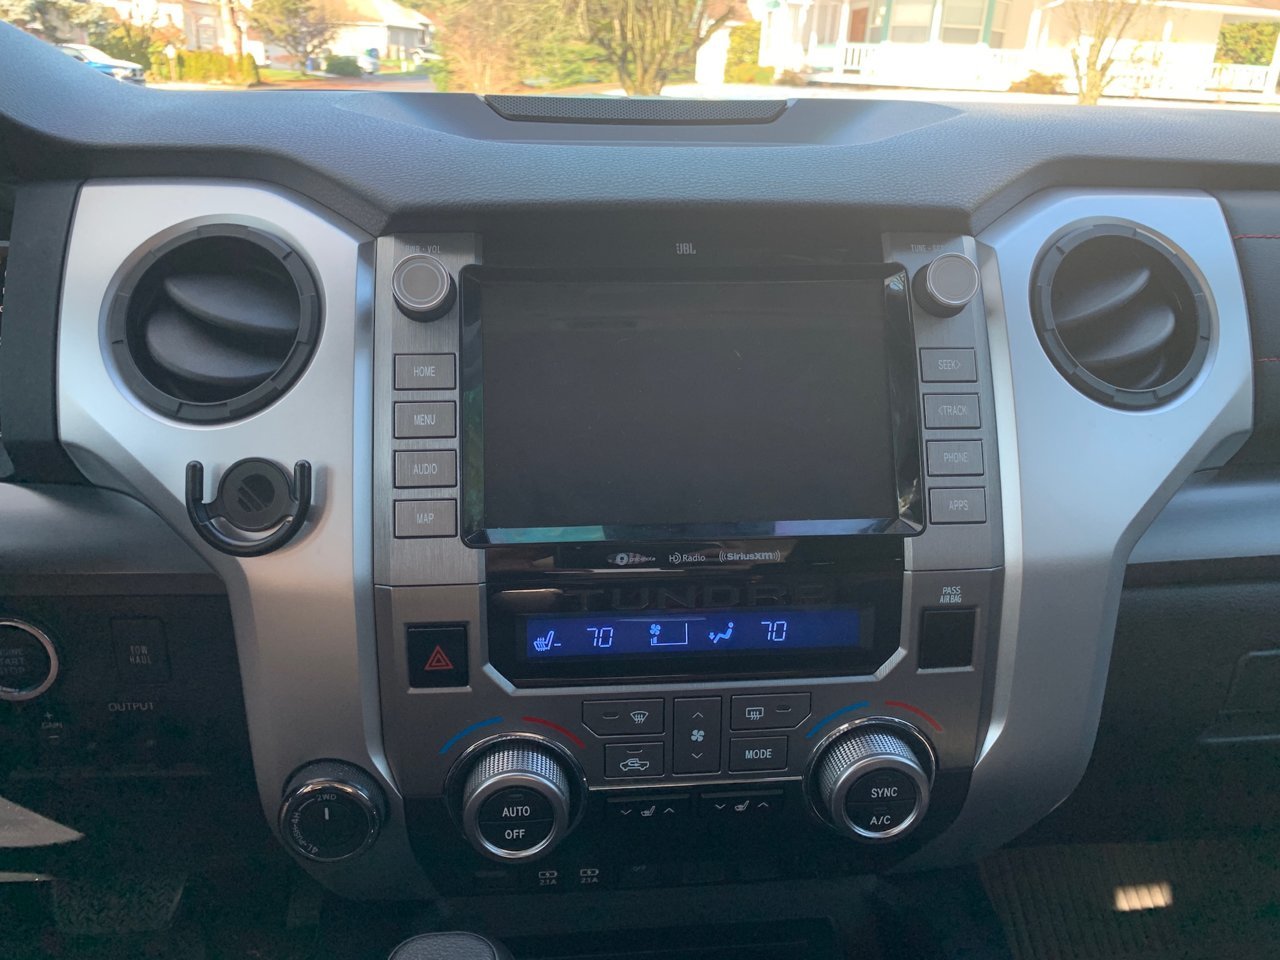 2020 TRD PRO ~ Removing Dual climate panel | Toyota Tundra Forum